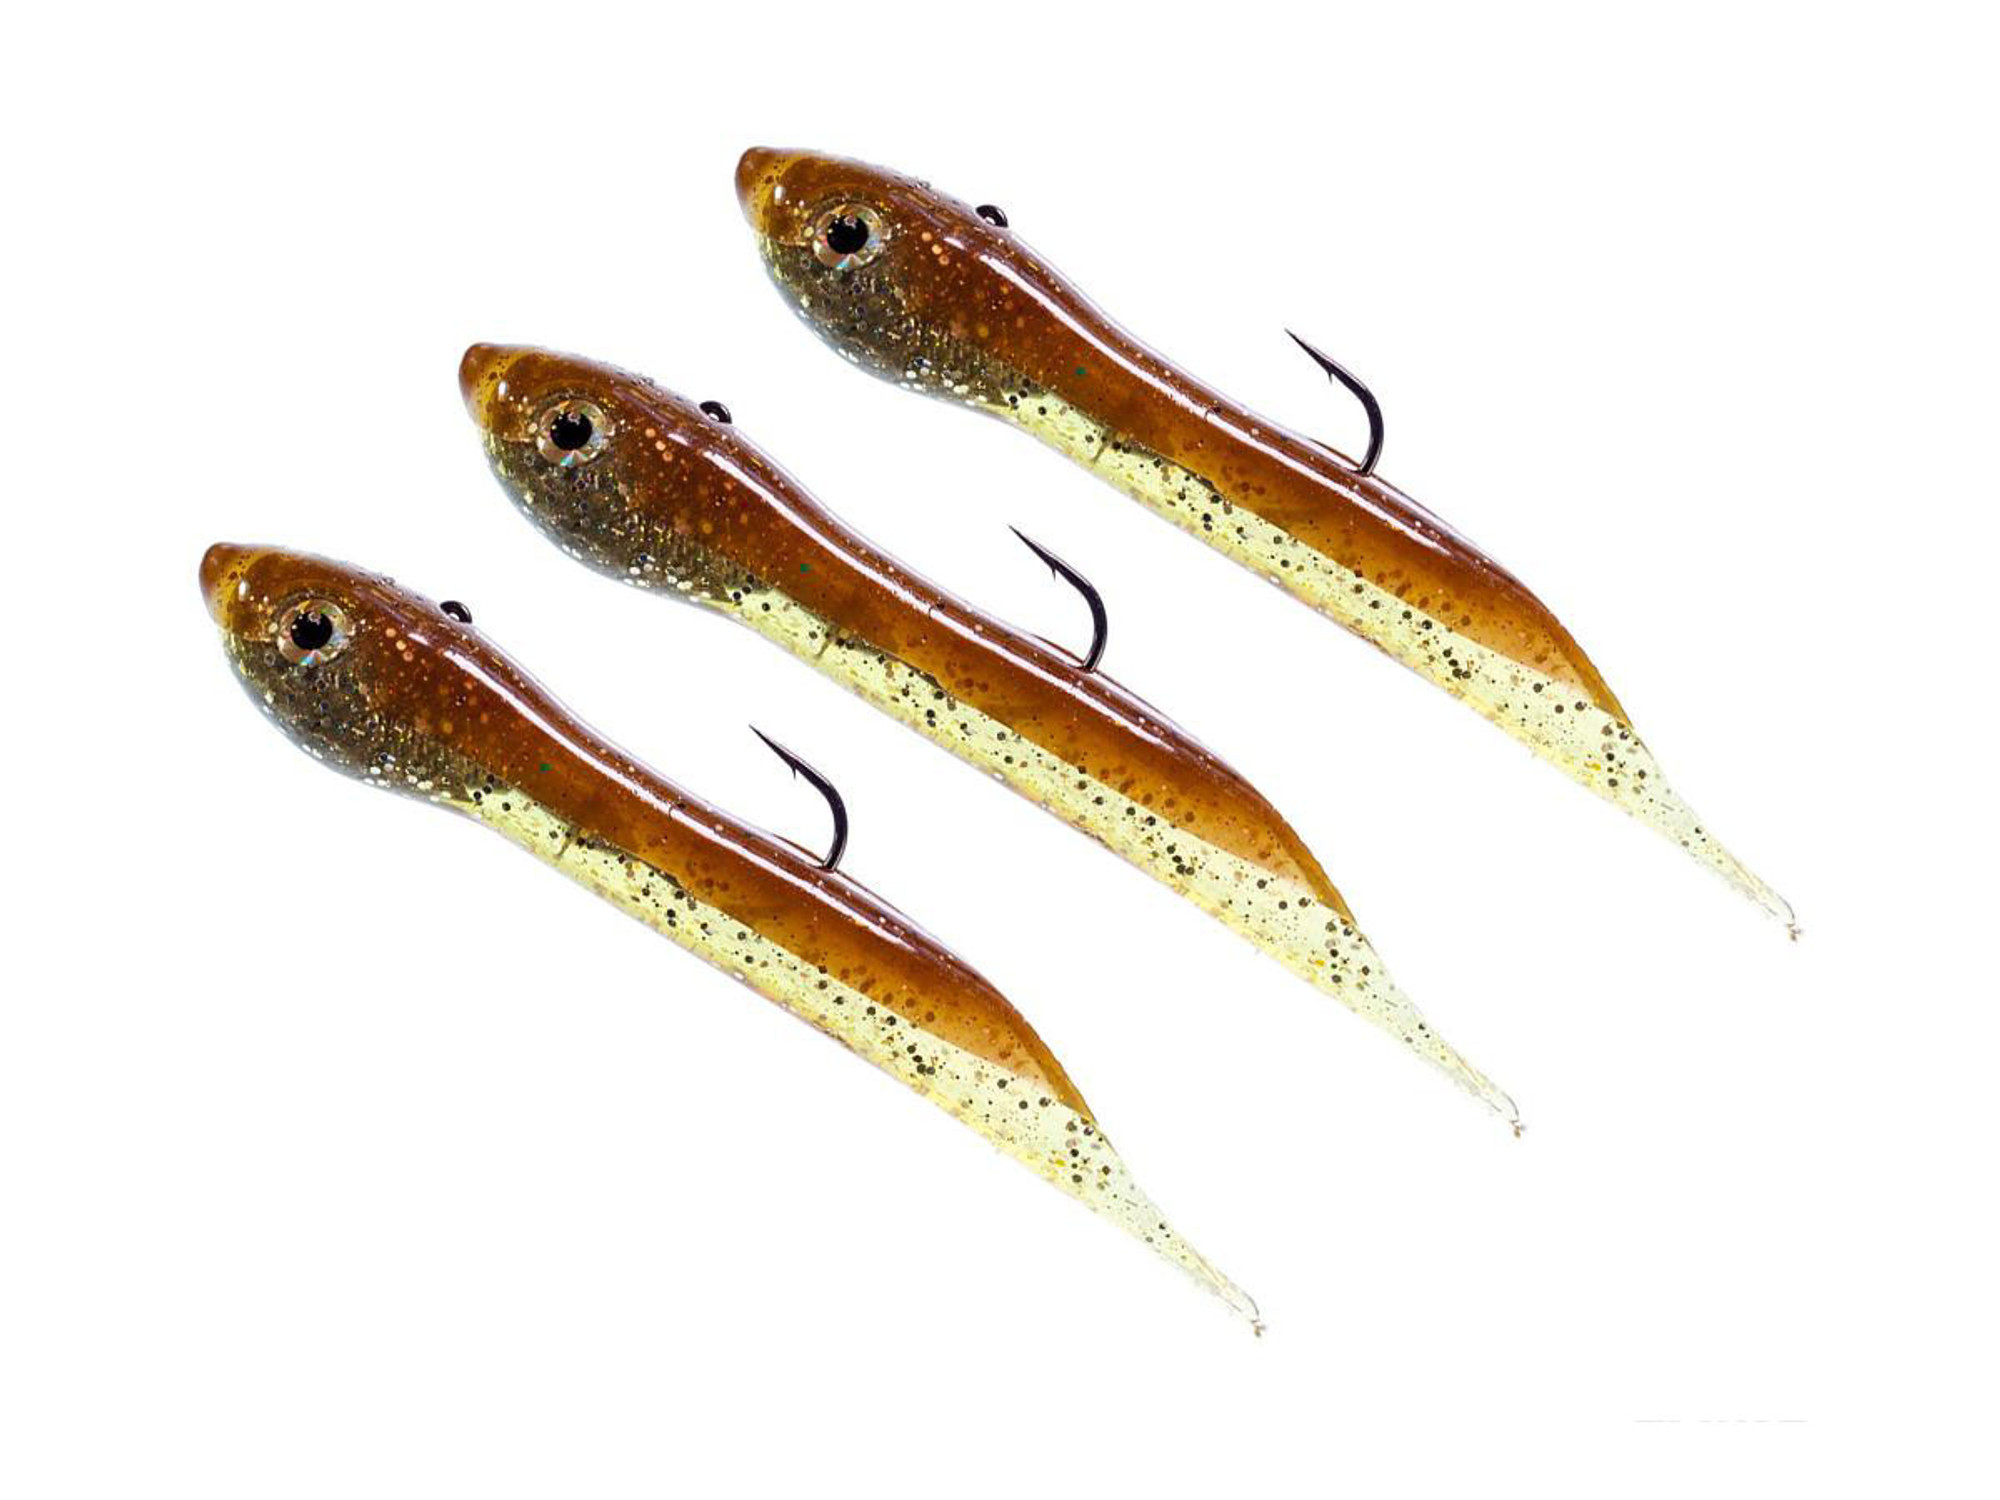 Hook Up Baits Handcrafted Soft Fishing Jigs (Color: Brown Gold / 3" / 1/8 oz)